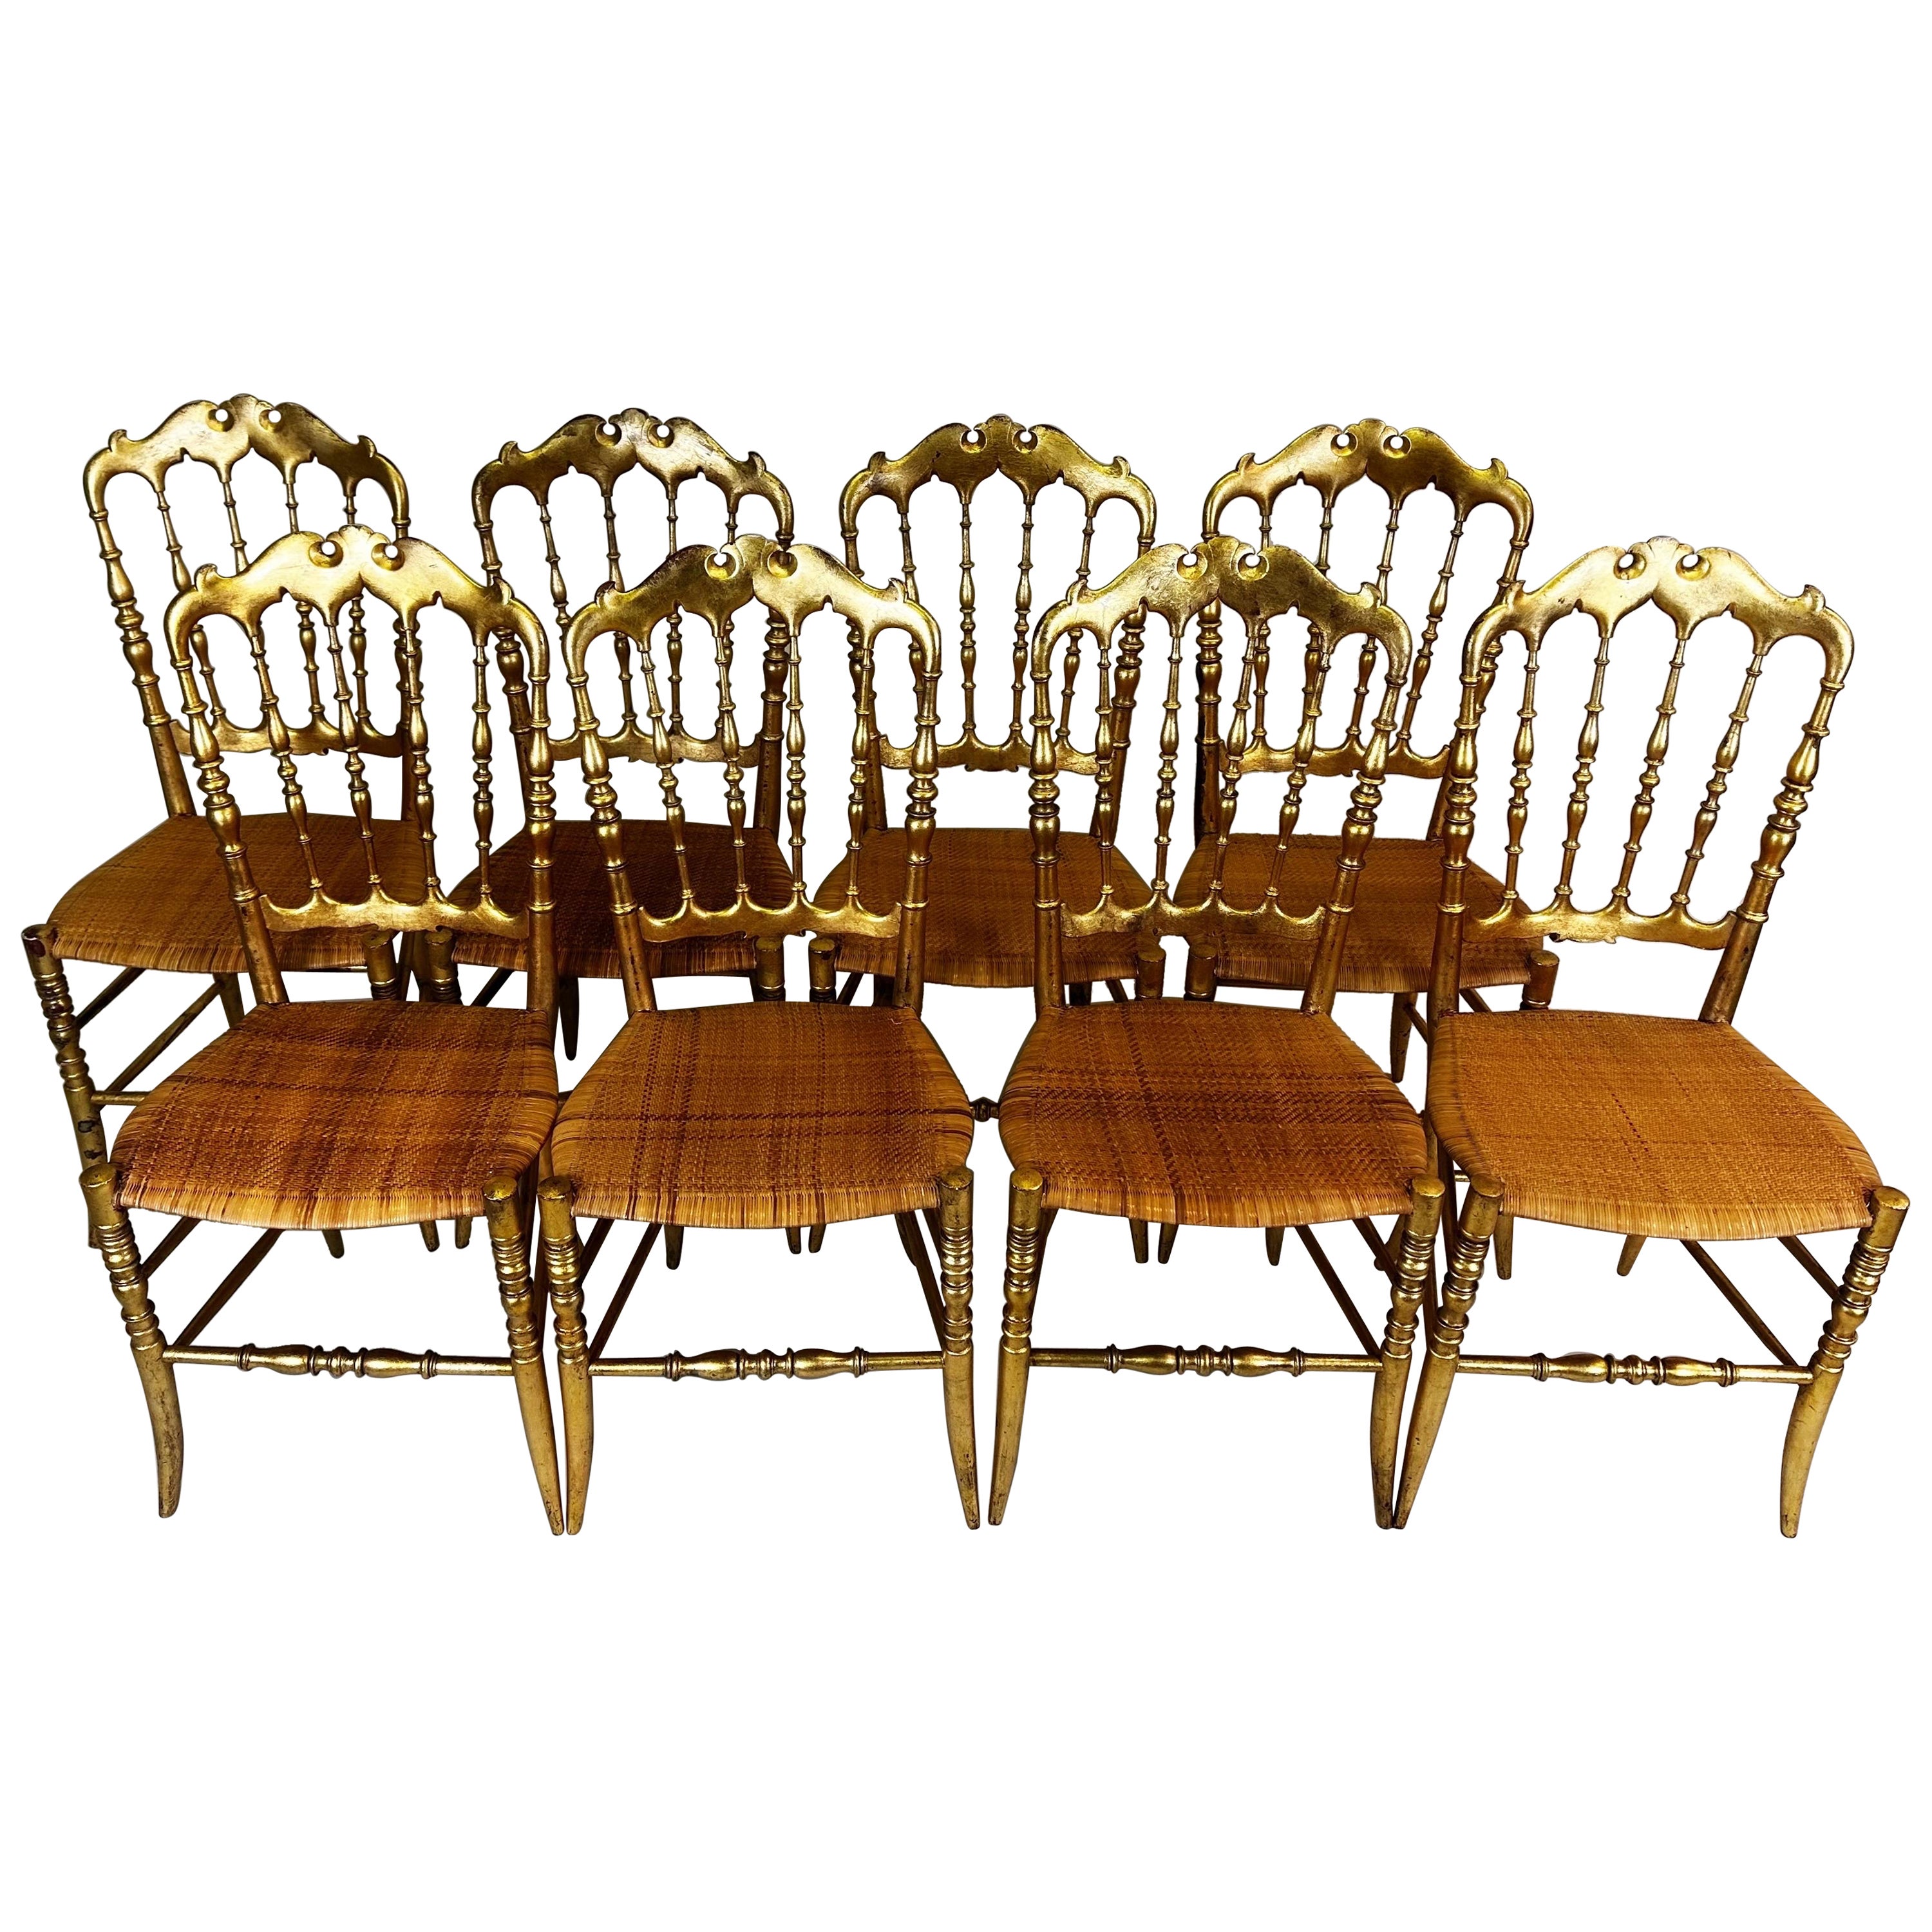 Set of 8 Italian Modern Neoclassical Dining Chairs in Carved Gilt Wood & Rattan